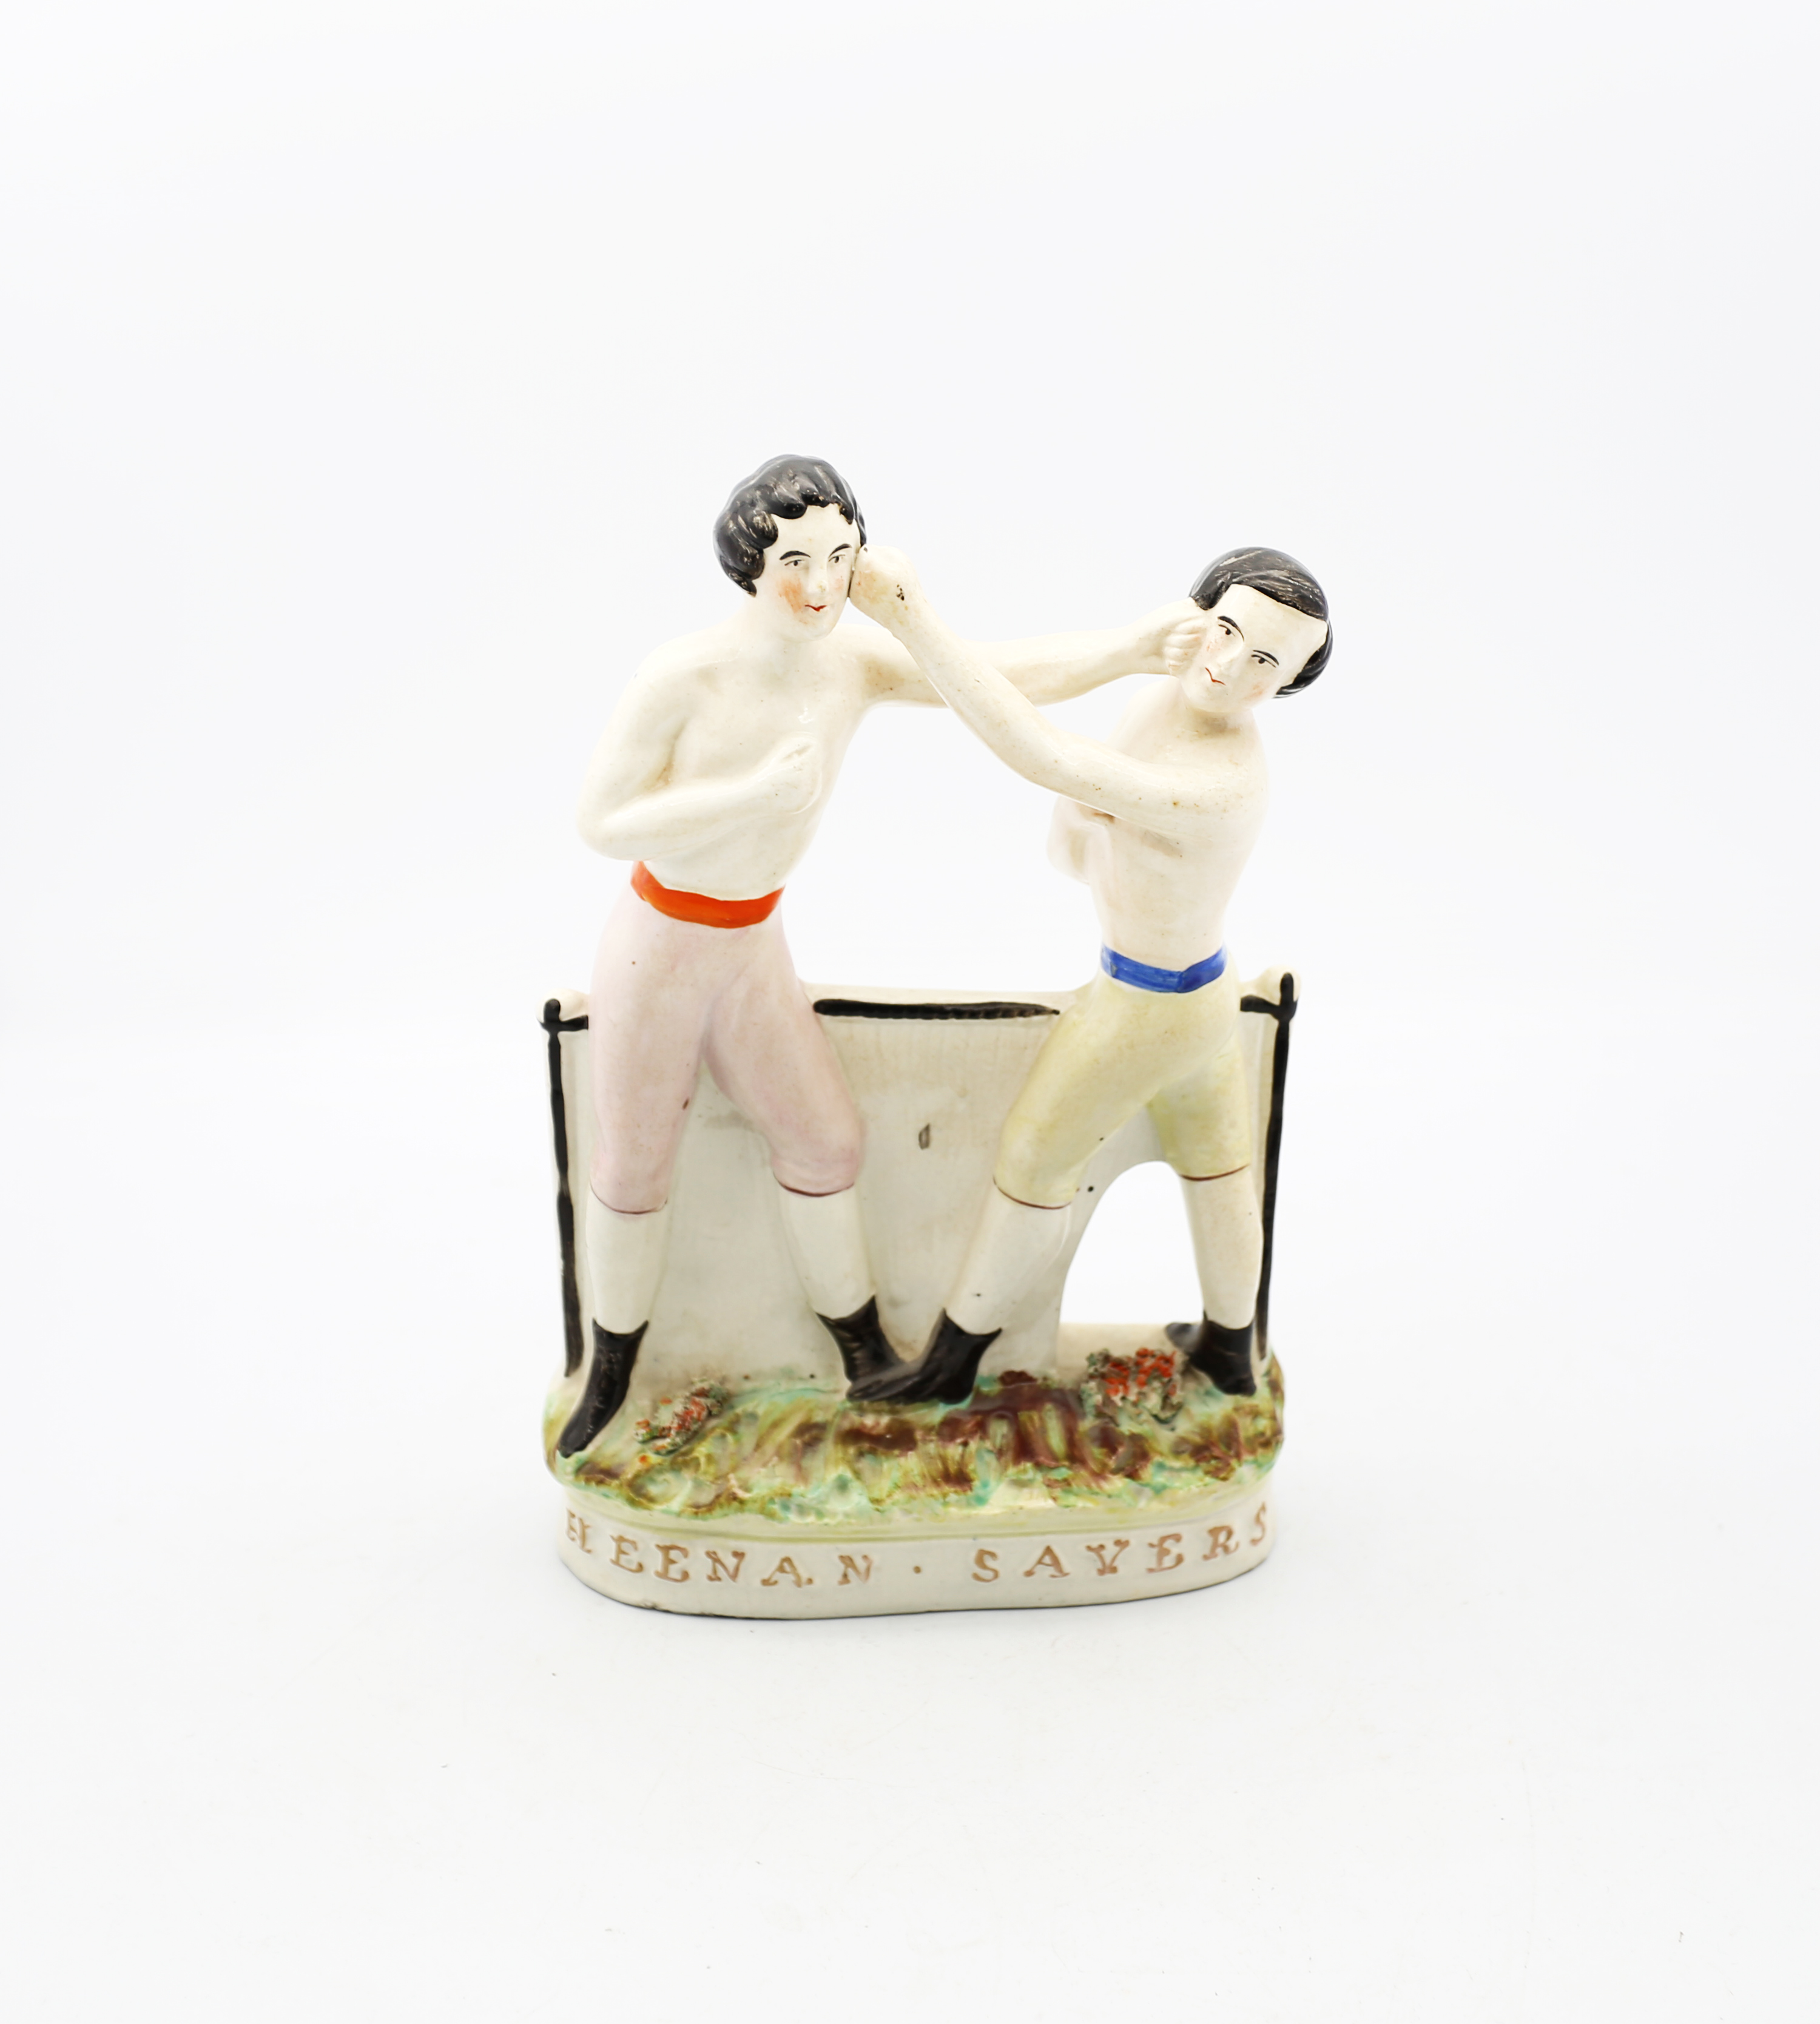 A Victorian Staffordshire pottery figure of Heenan and Sayers, standing on an oval base  titled  ‘